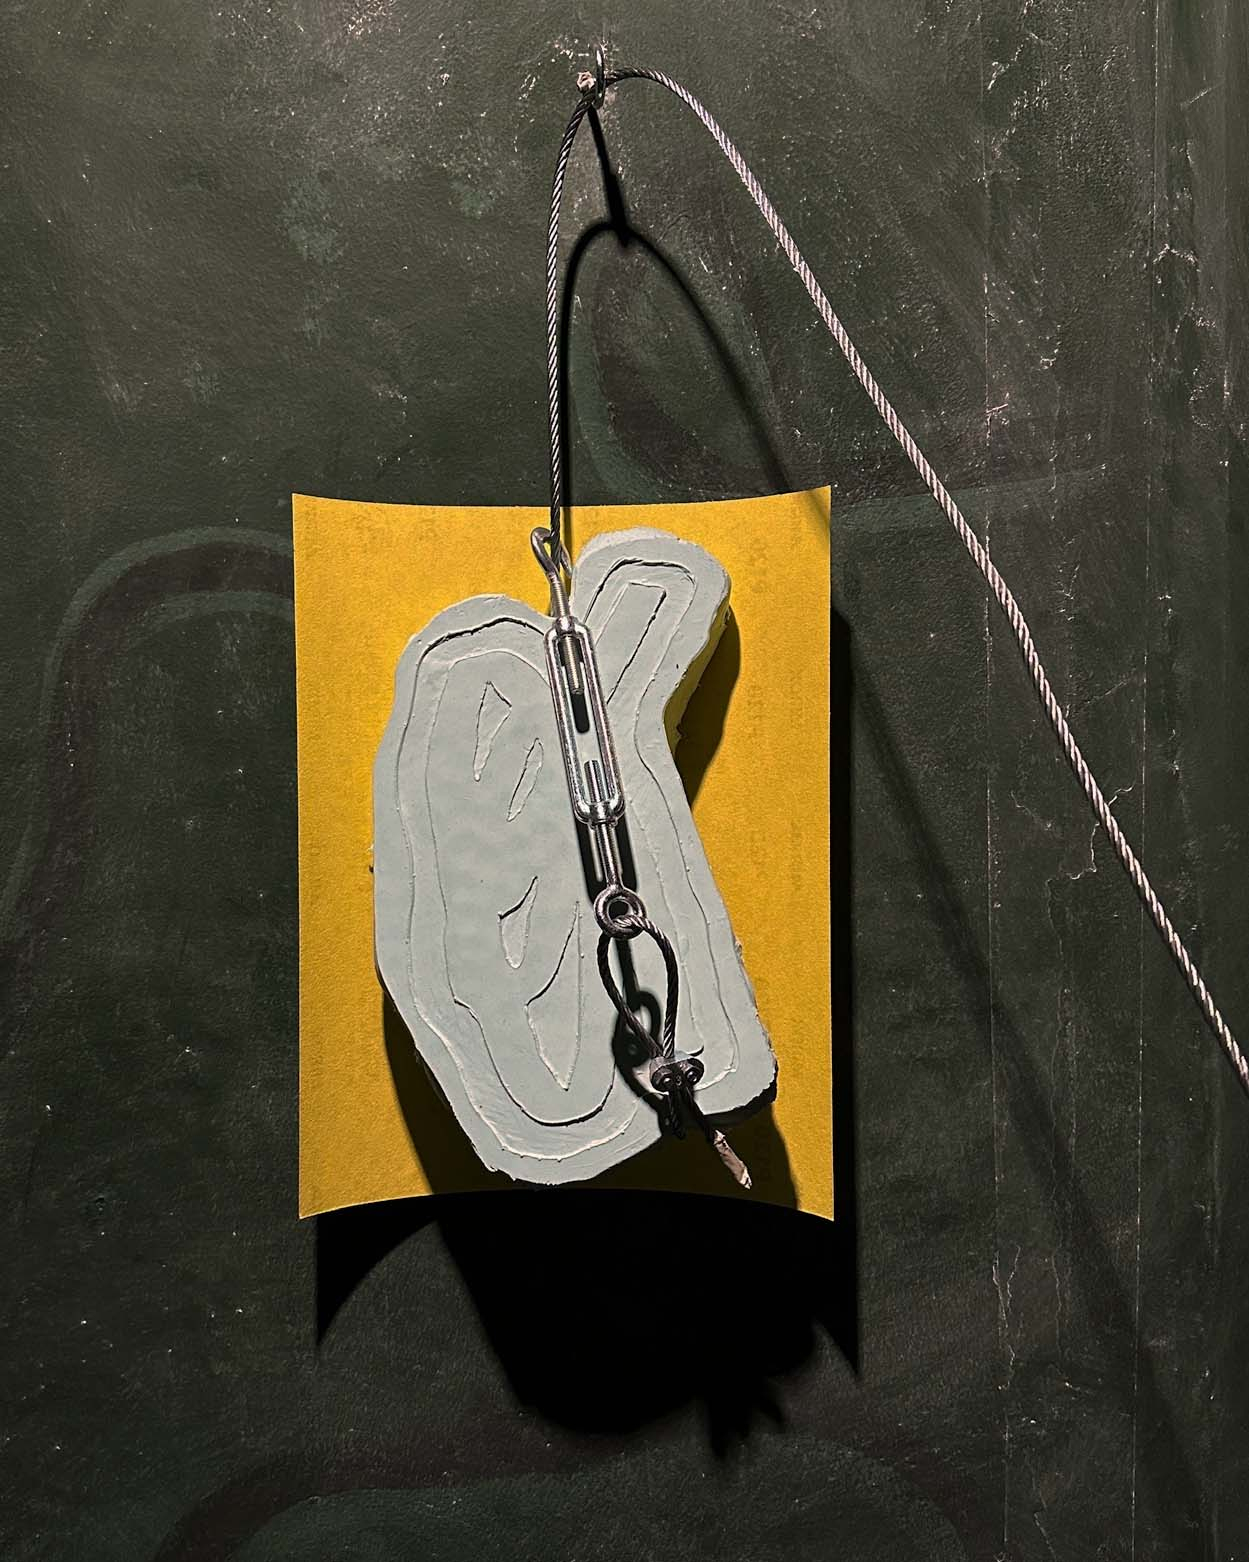 steel wire hanging a blue silicone sculpture, in front of a sheet of yellow sandpaper, on a dark green wall